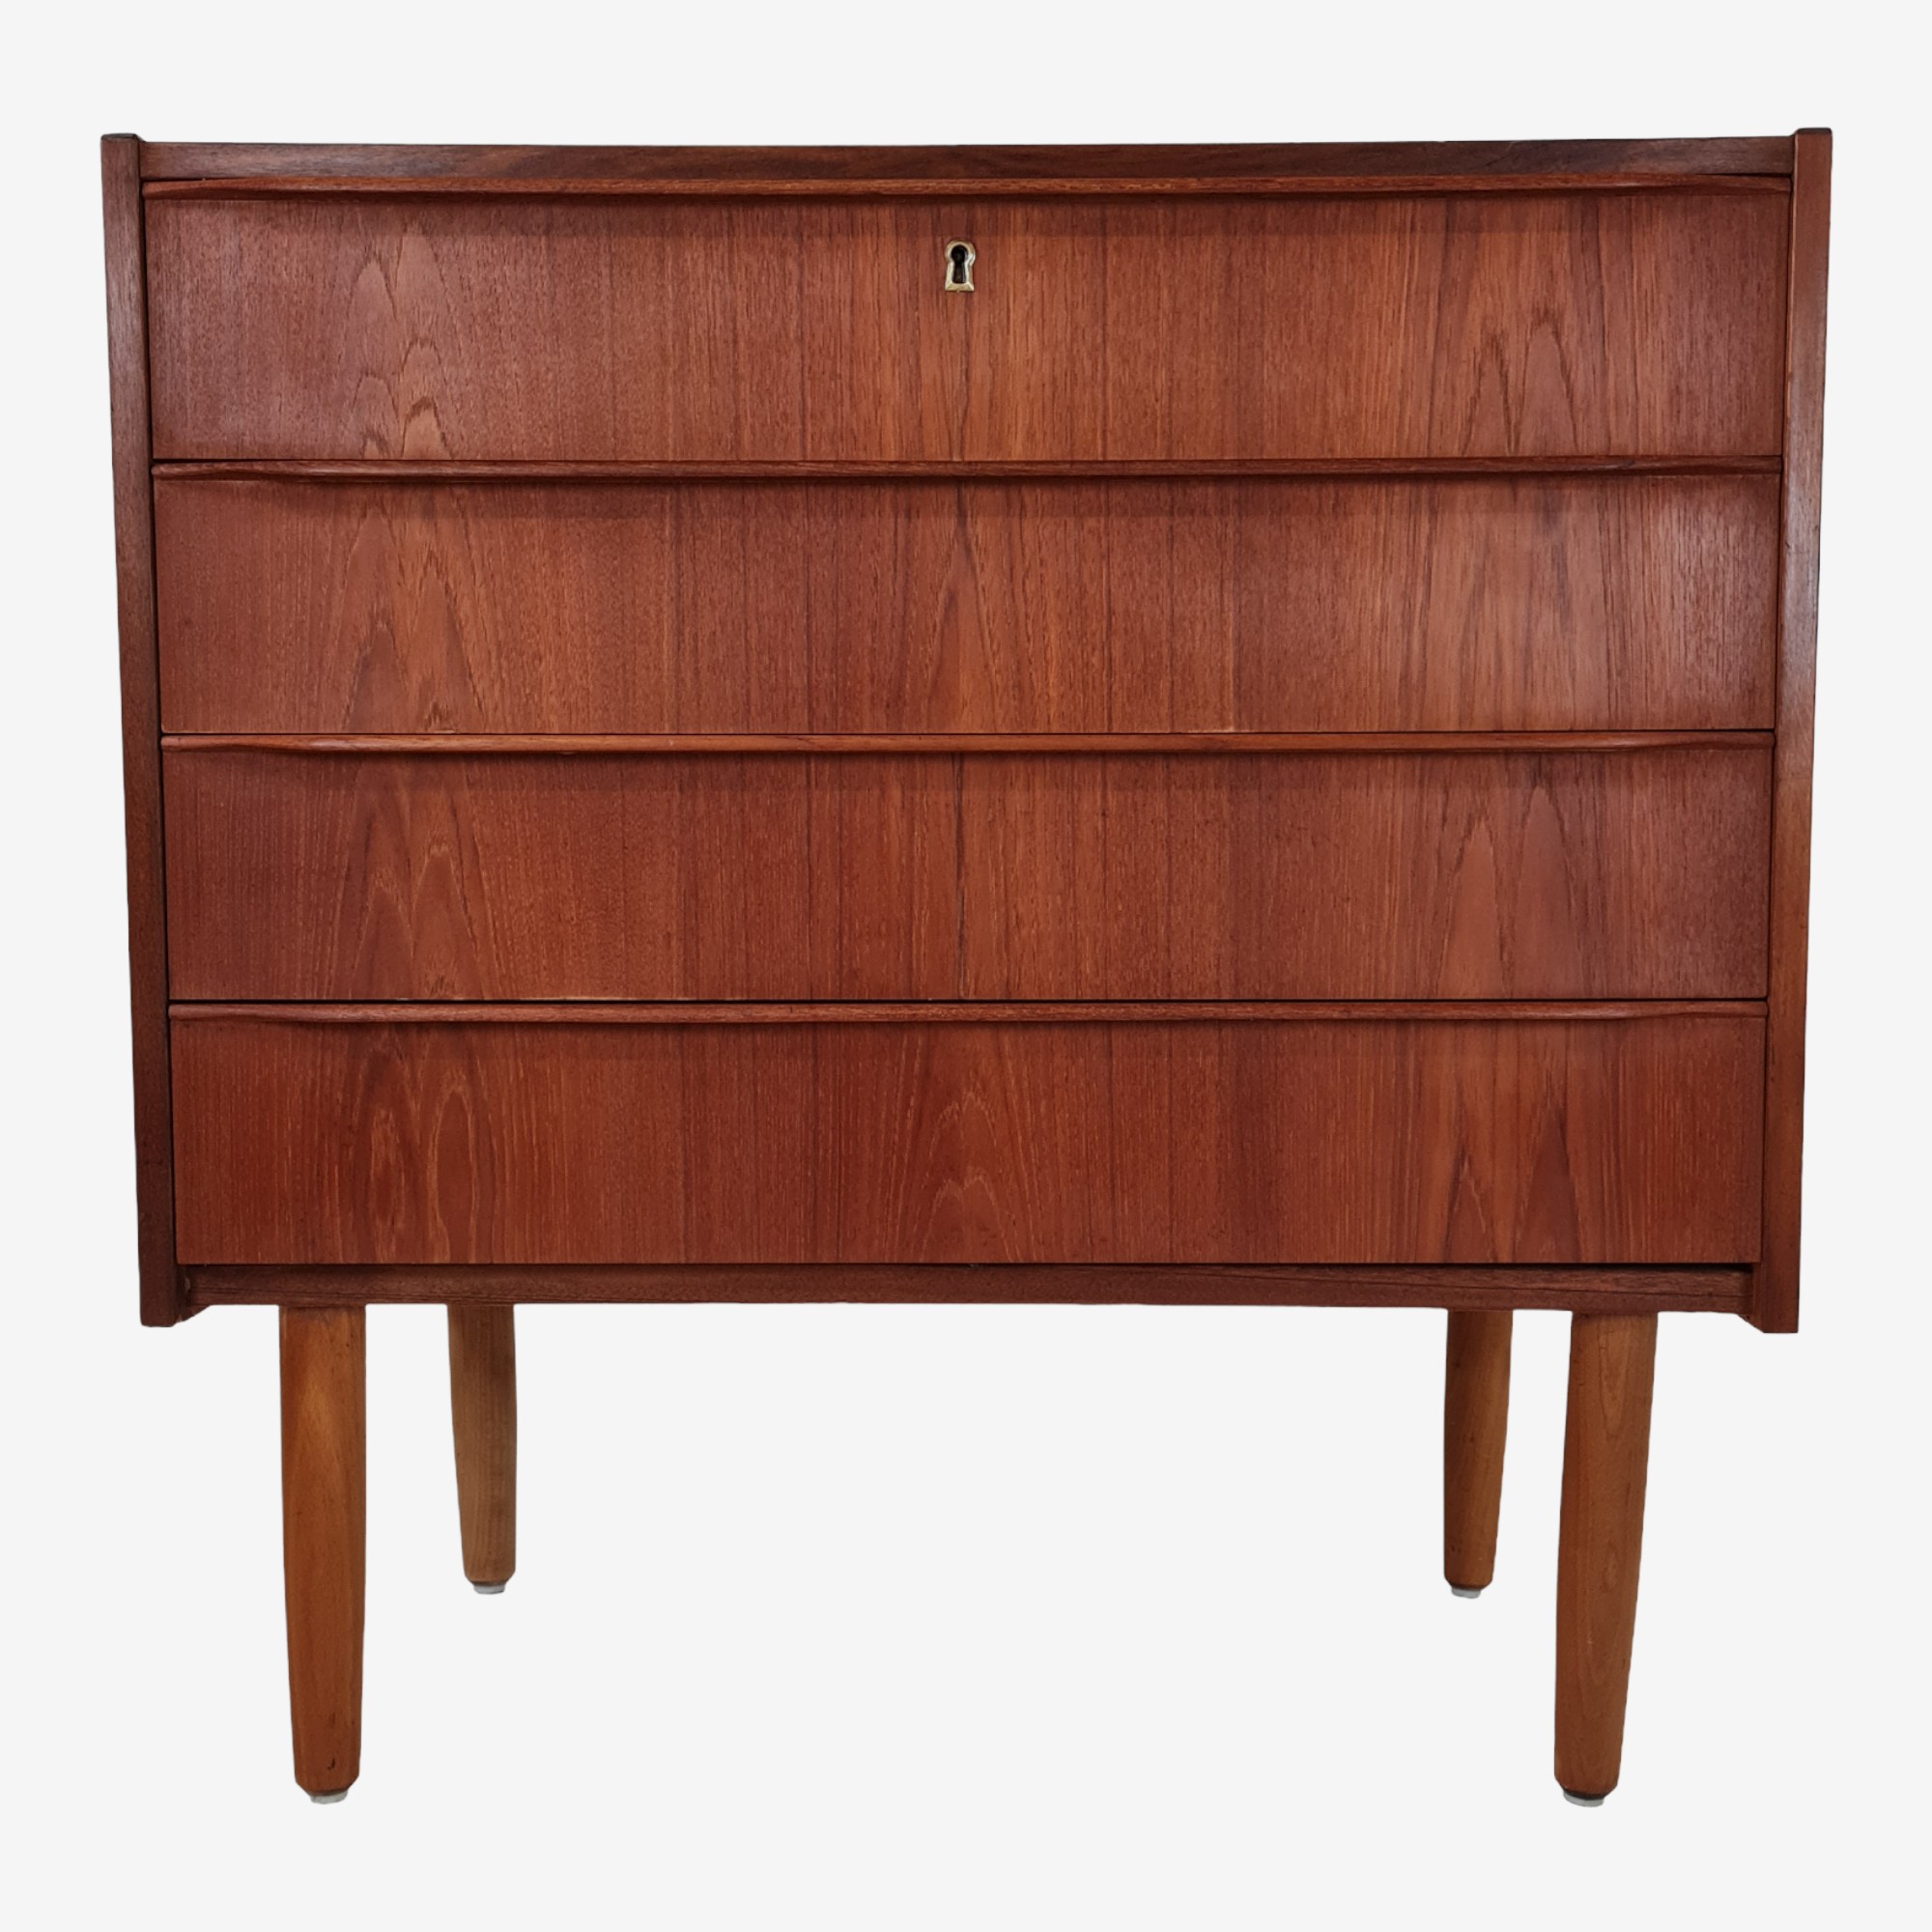 Chest of drawers with 4 drawers | Teak | Danish furniture manufacturer